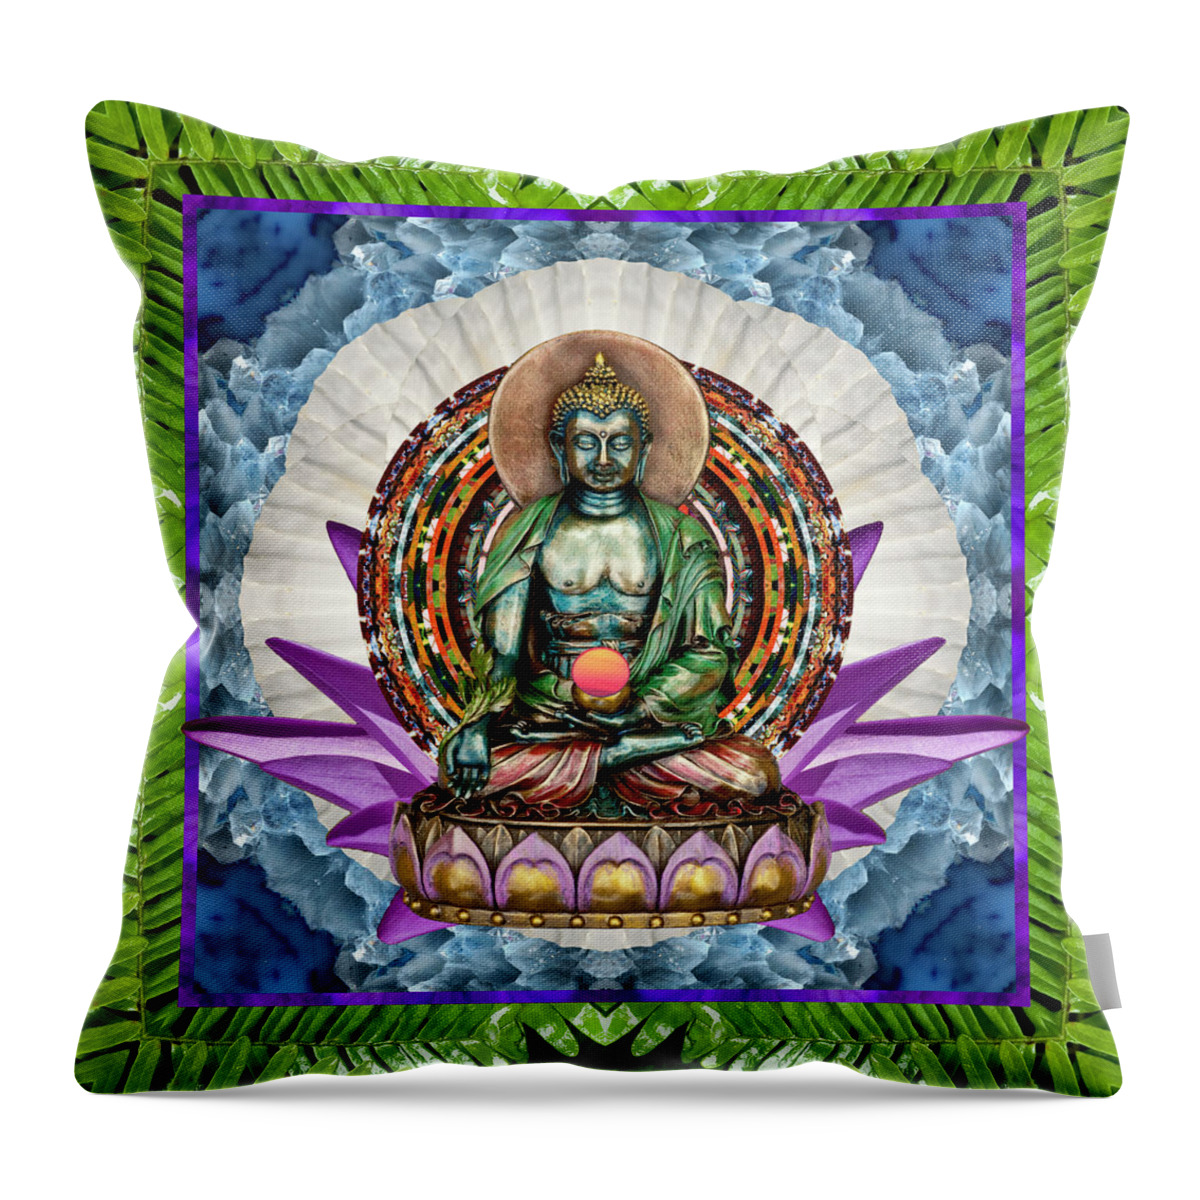 Mandalas Throw Pillow featuring the photograph King Panacea by Bell And Todd